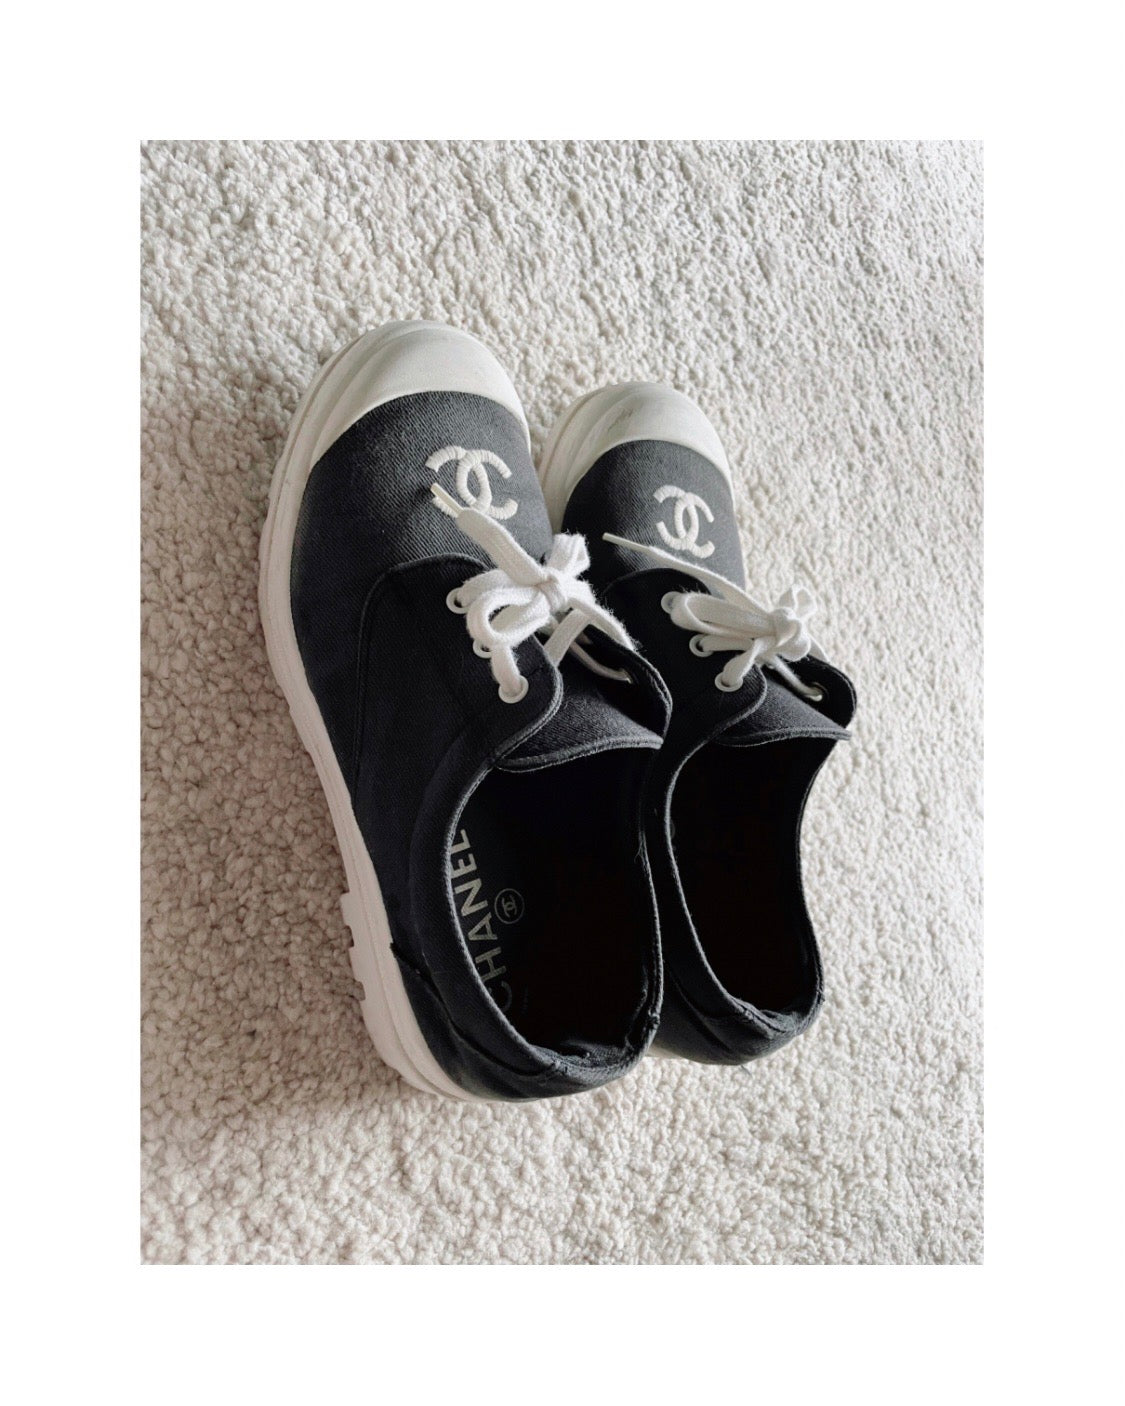 CHANEL CC Logos Bi-color Sneakers Shoes 雙C Logo 凡布鞋 - STAY PURE